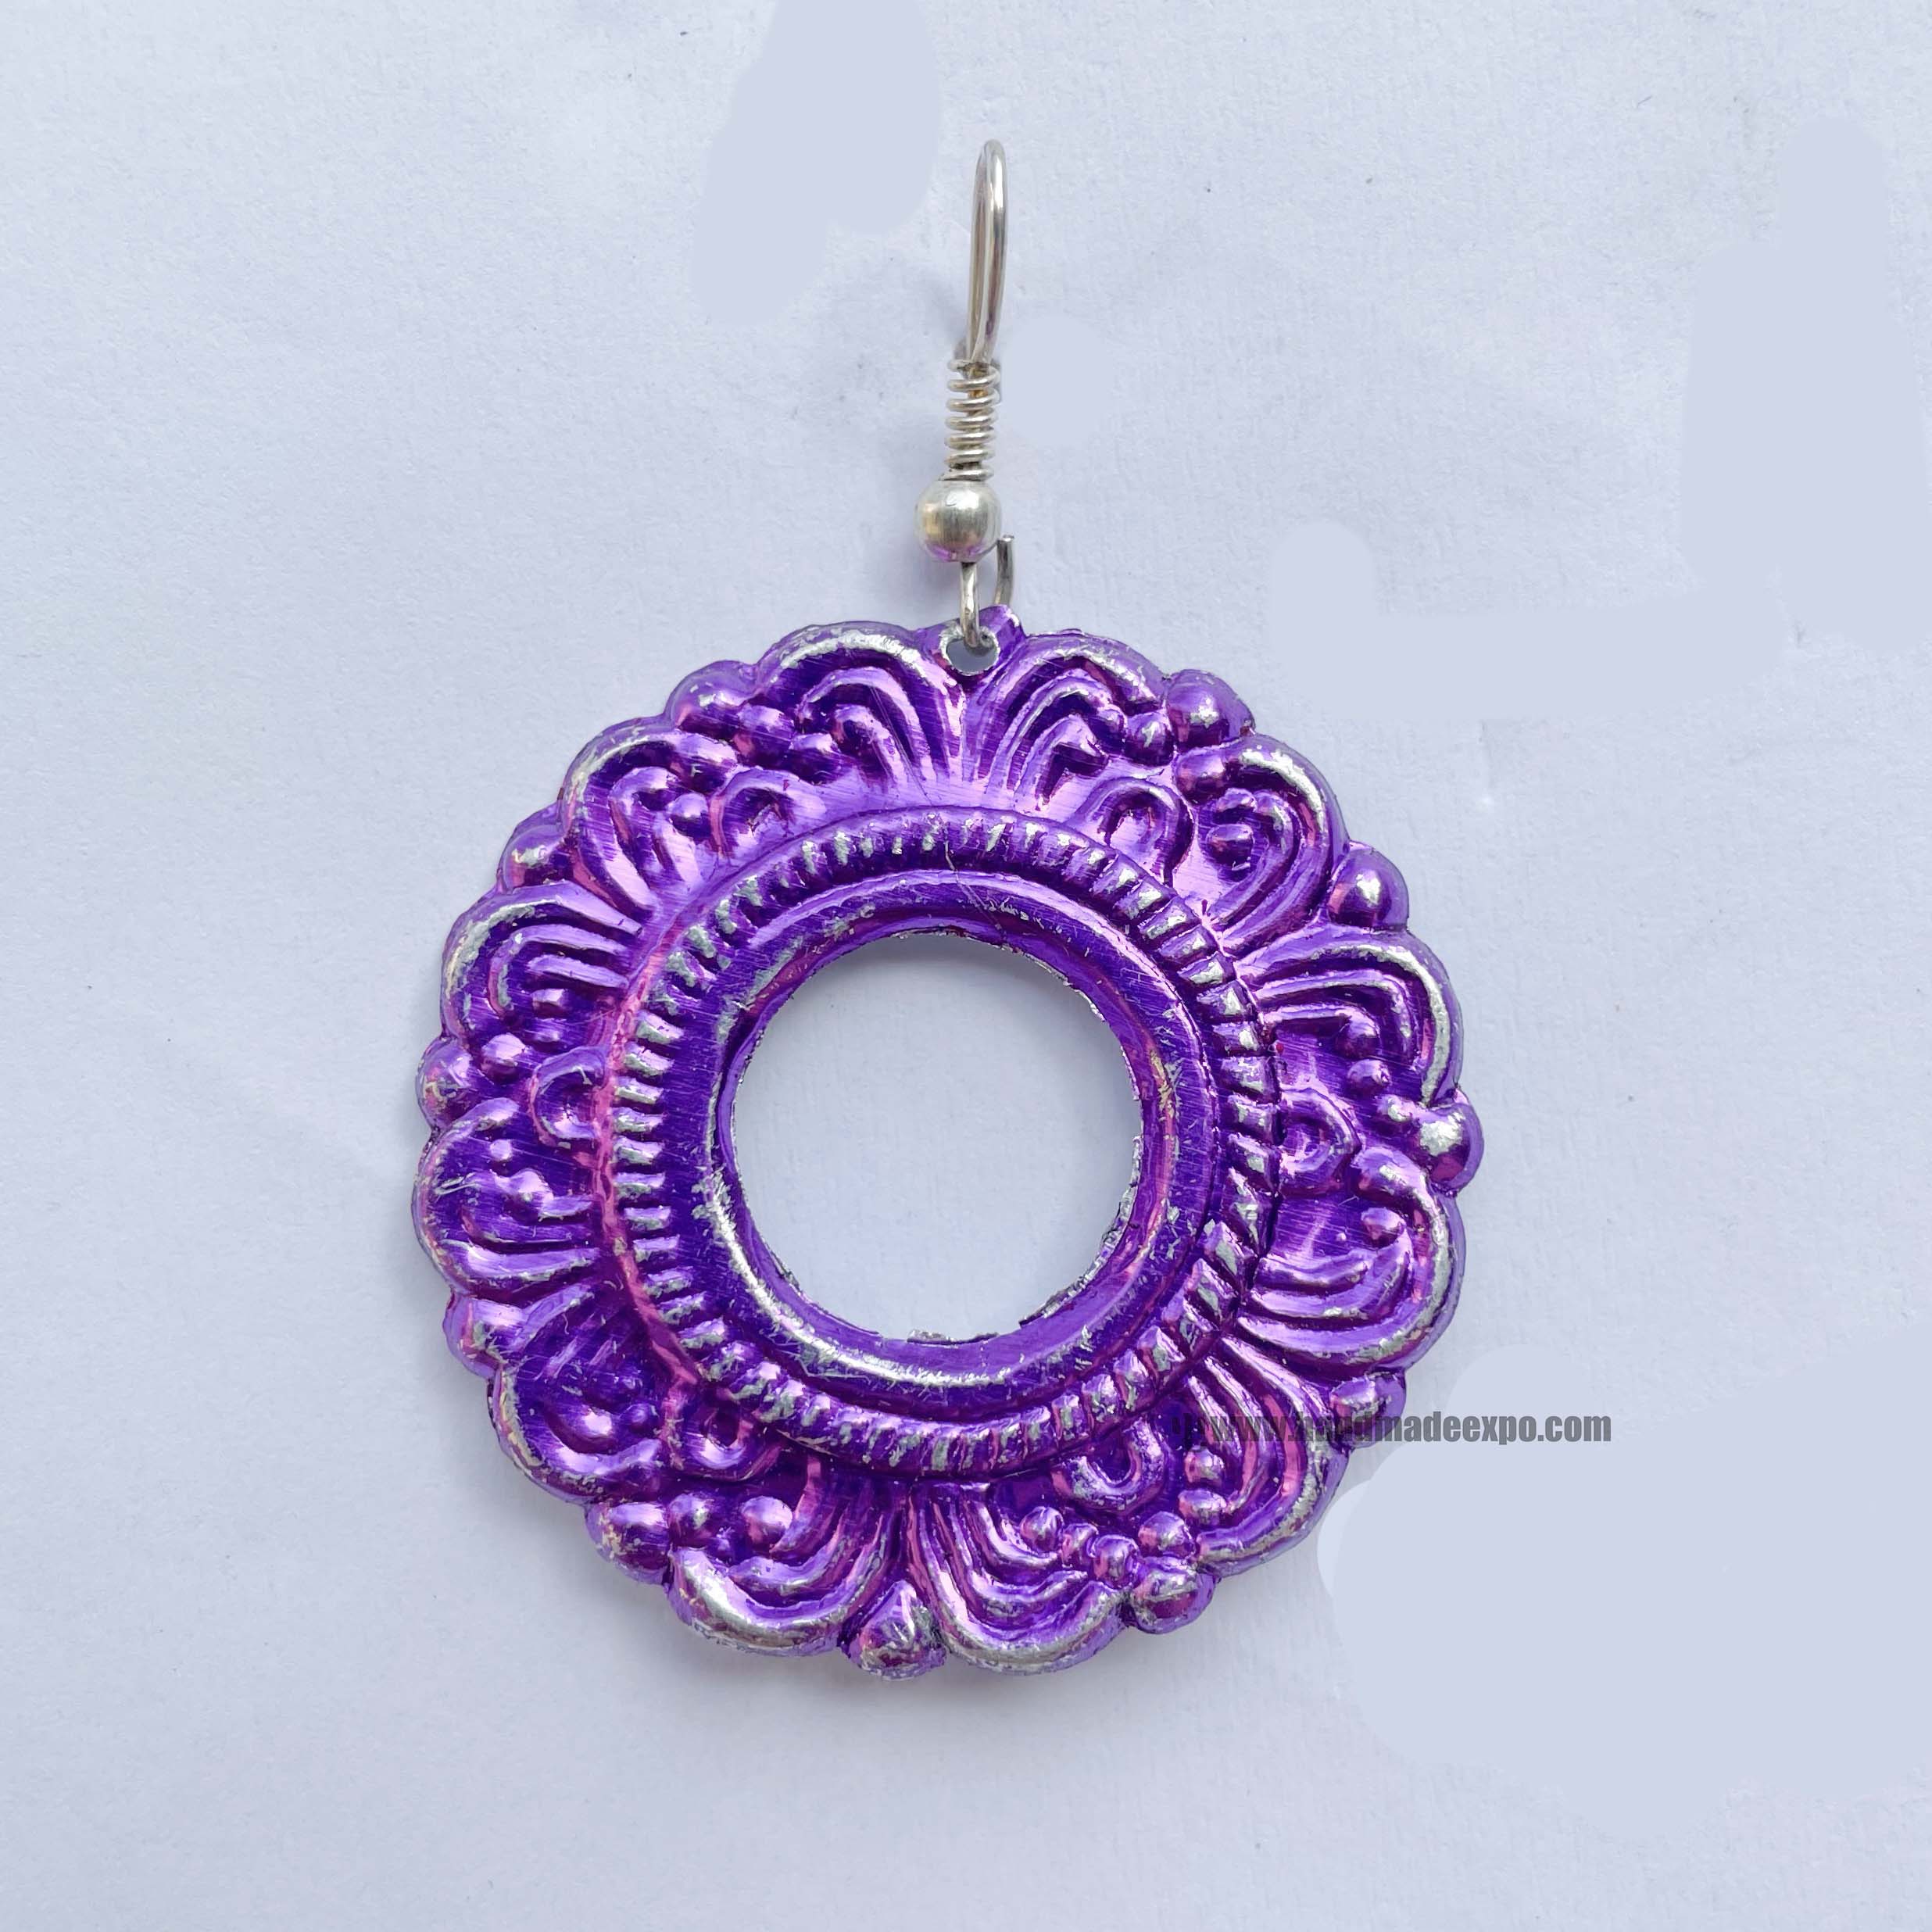 Metal Earring flower Design, With Whole Purple